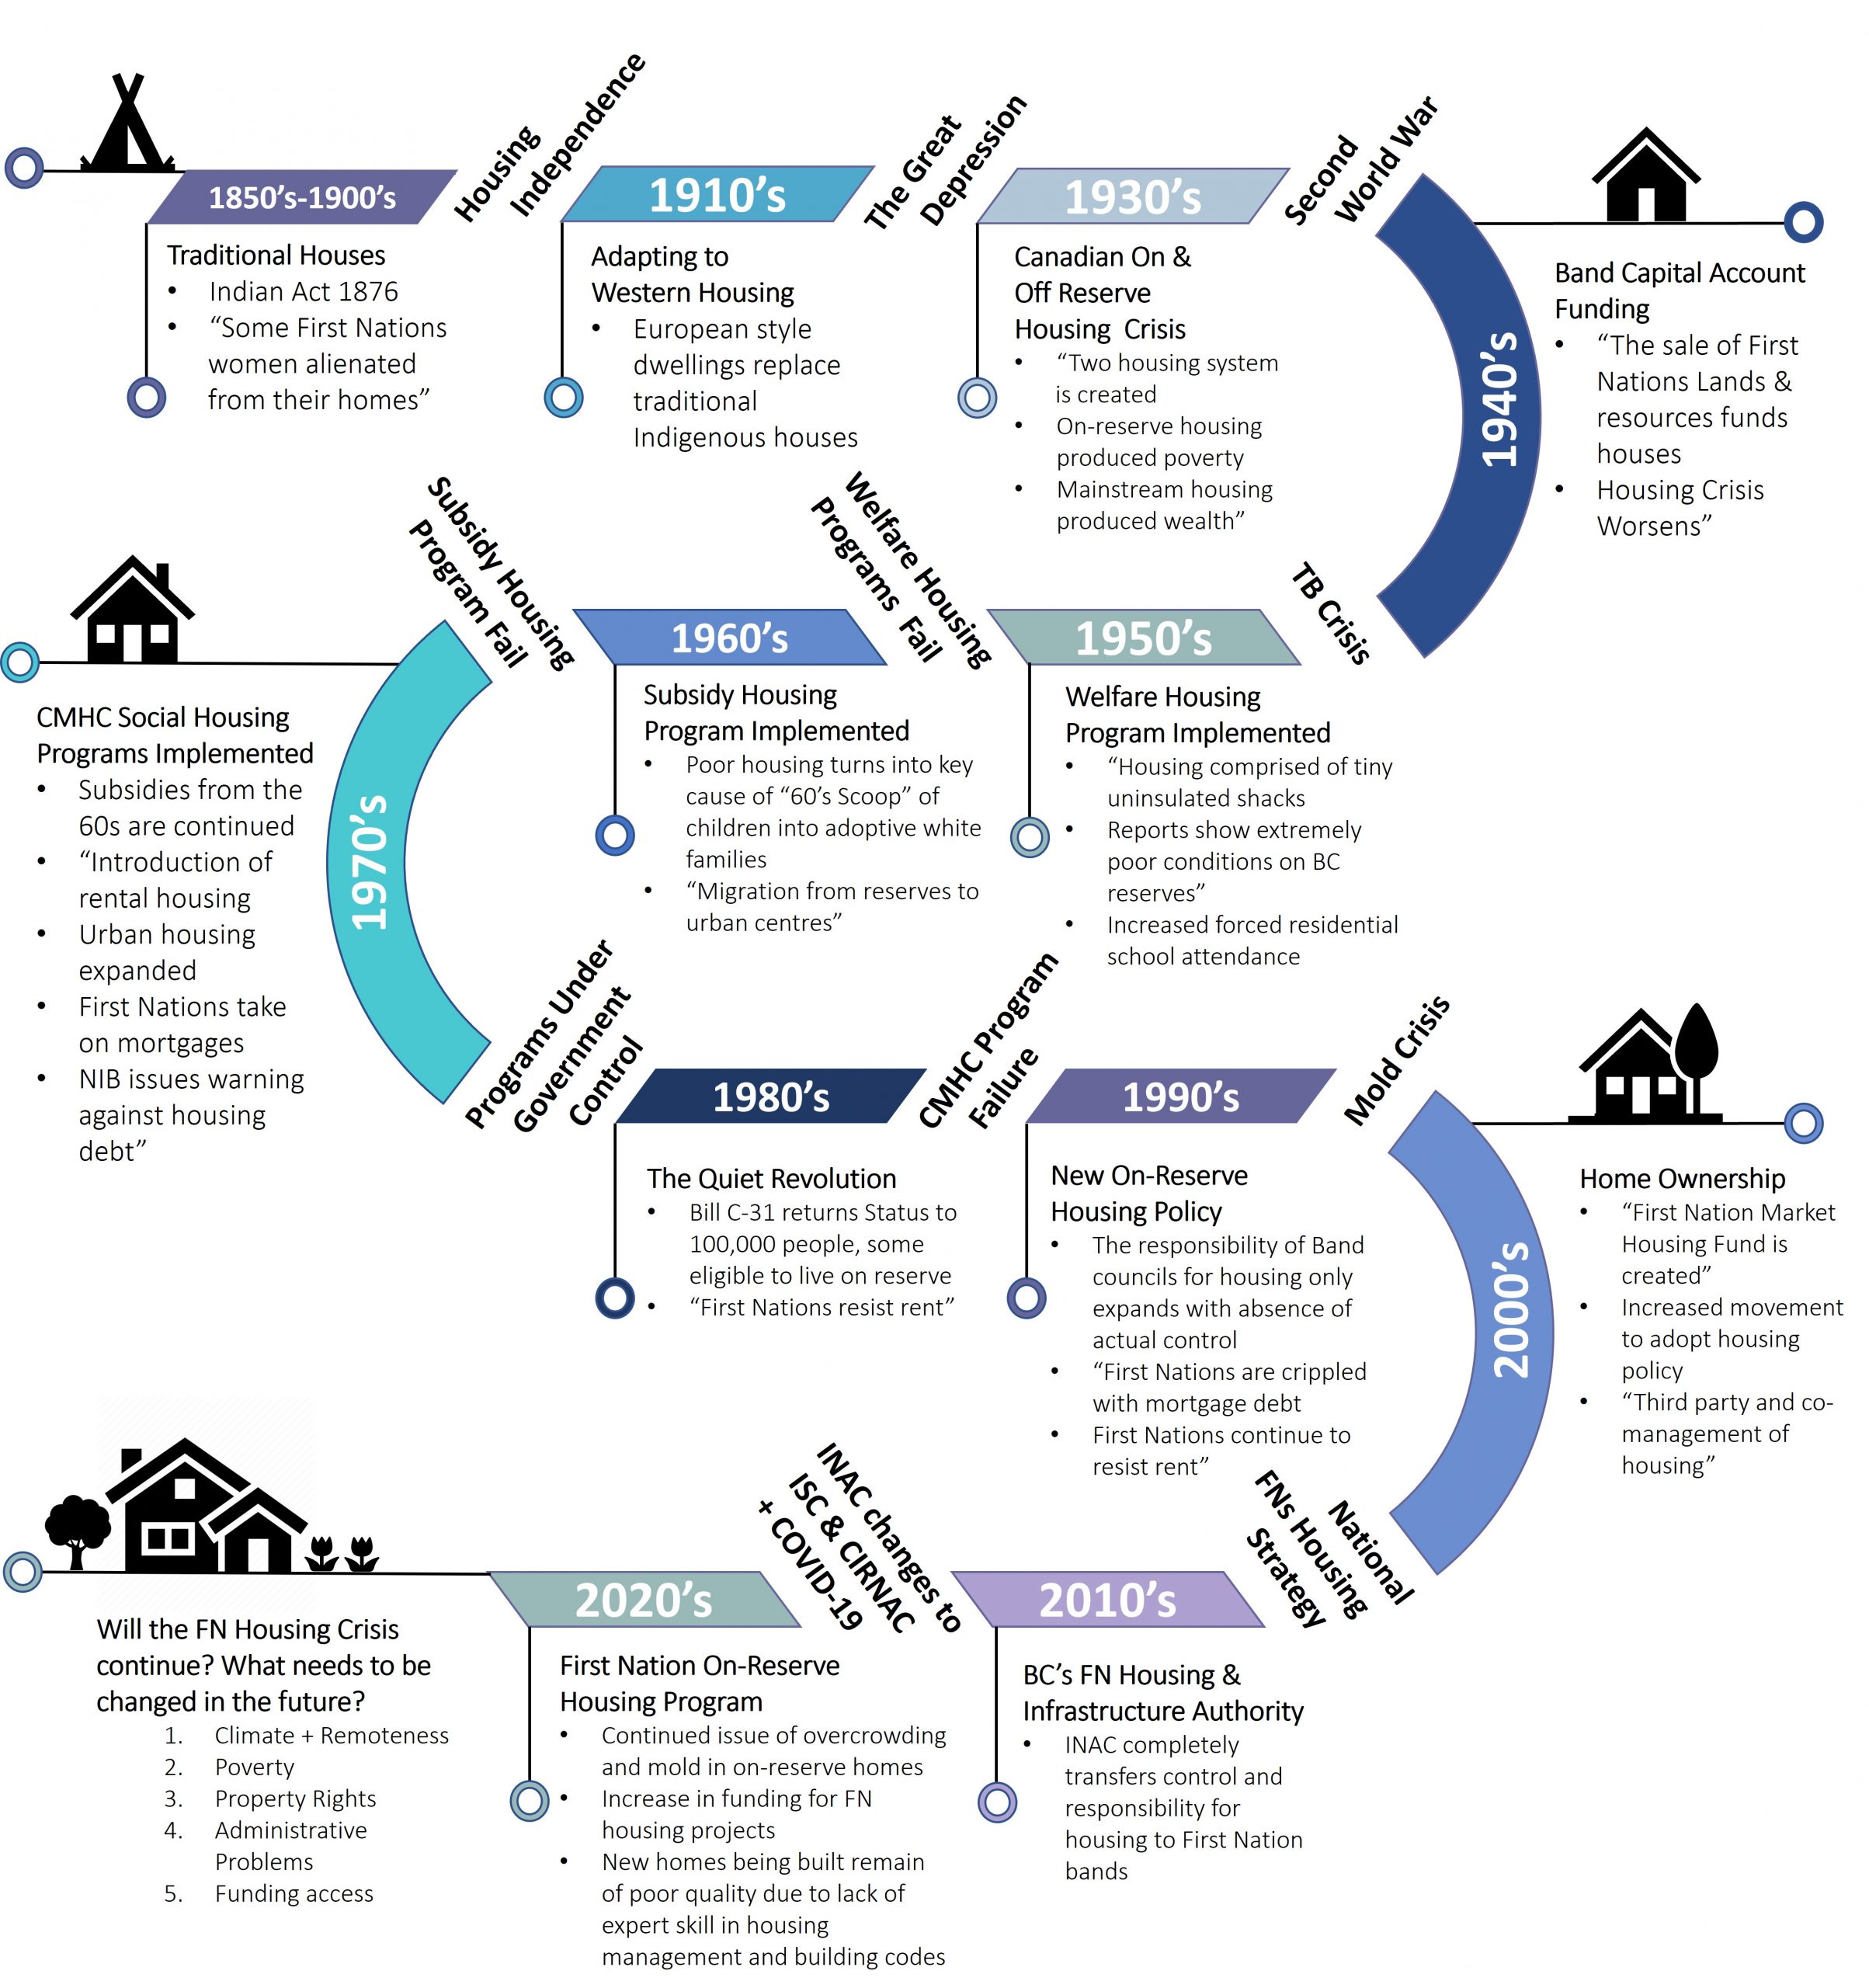 Timeline of On-Reserve Housing Programs and Developments. Graphic by: Pauline Galoustian (Based on: A Short History of On-Reserve Housing. Content by: Sylvia Olsen; Original graphic design by: Desiree Bender; [136]